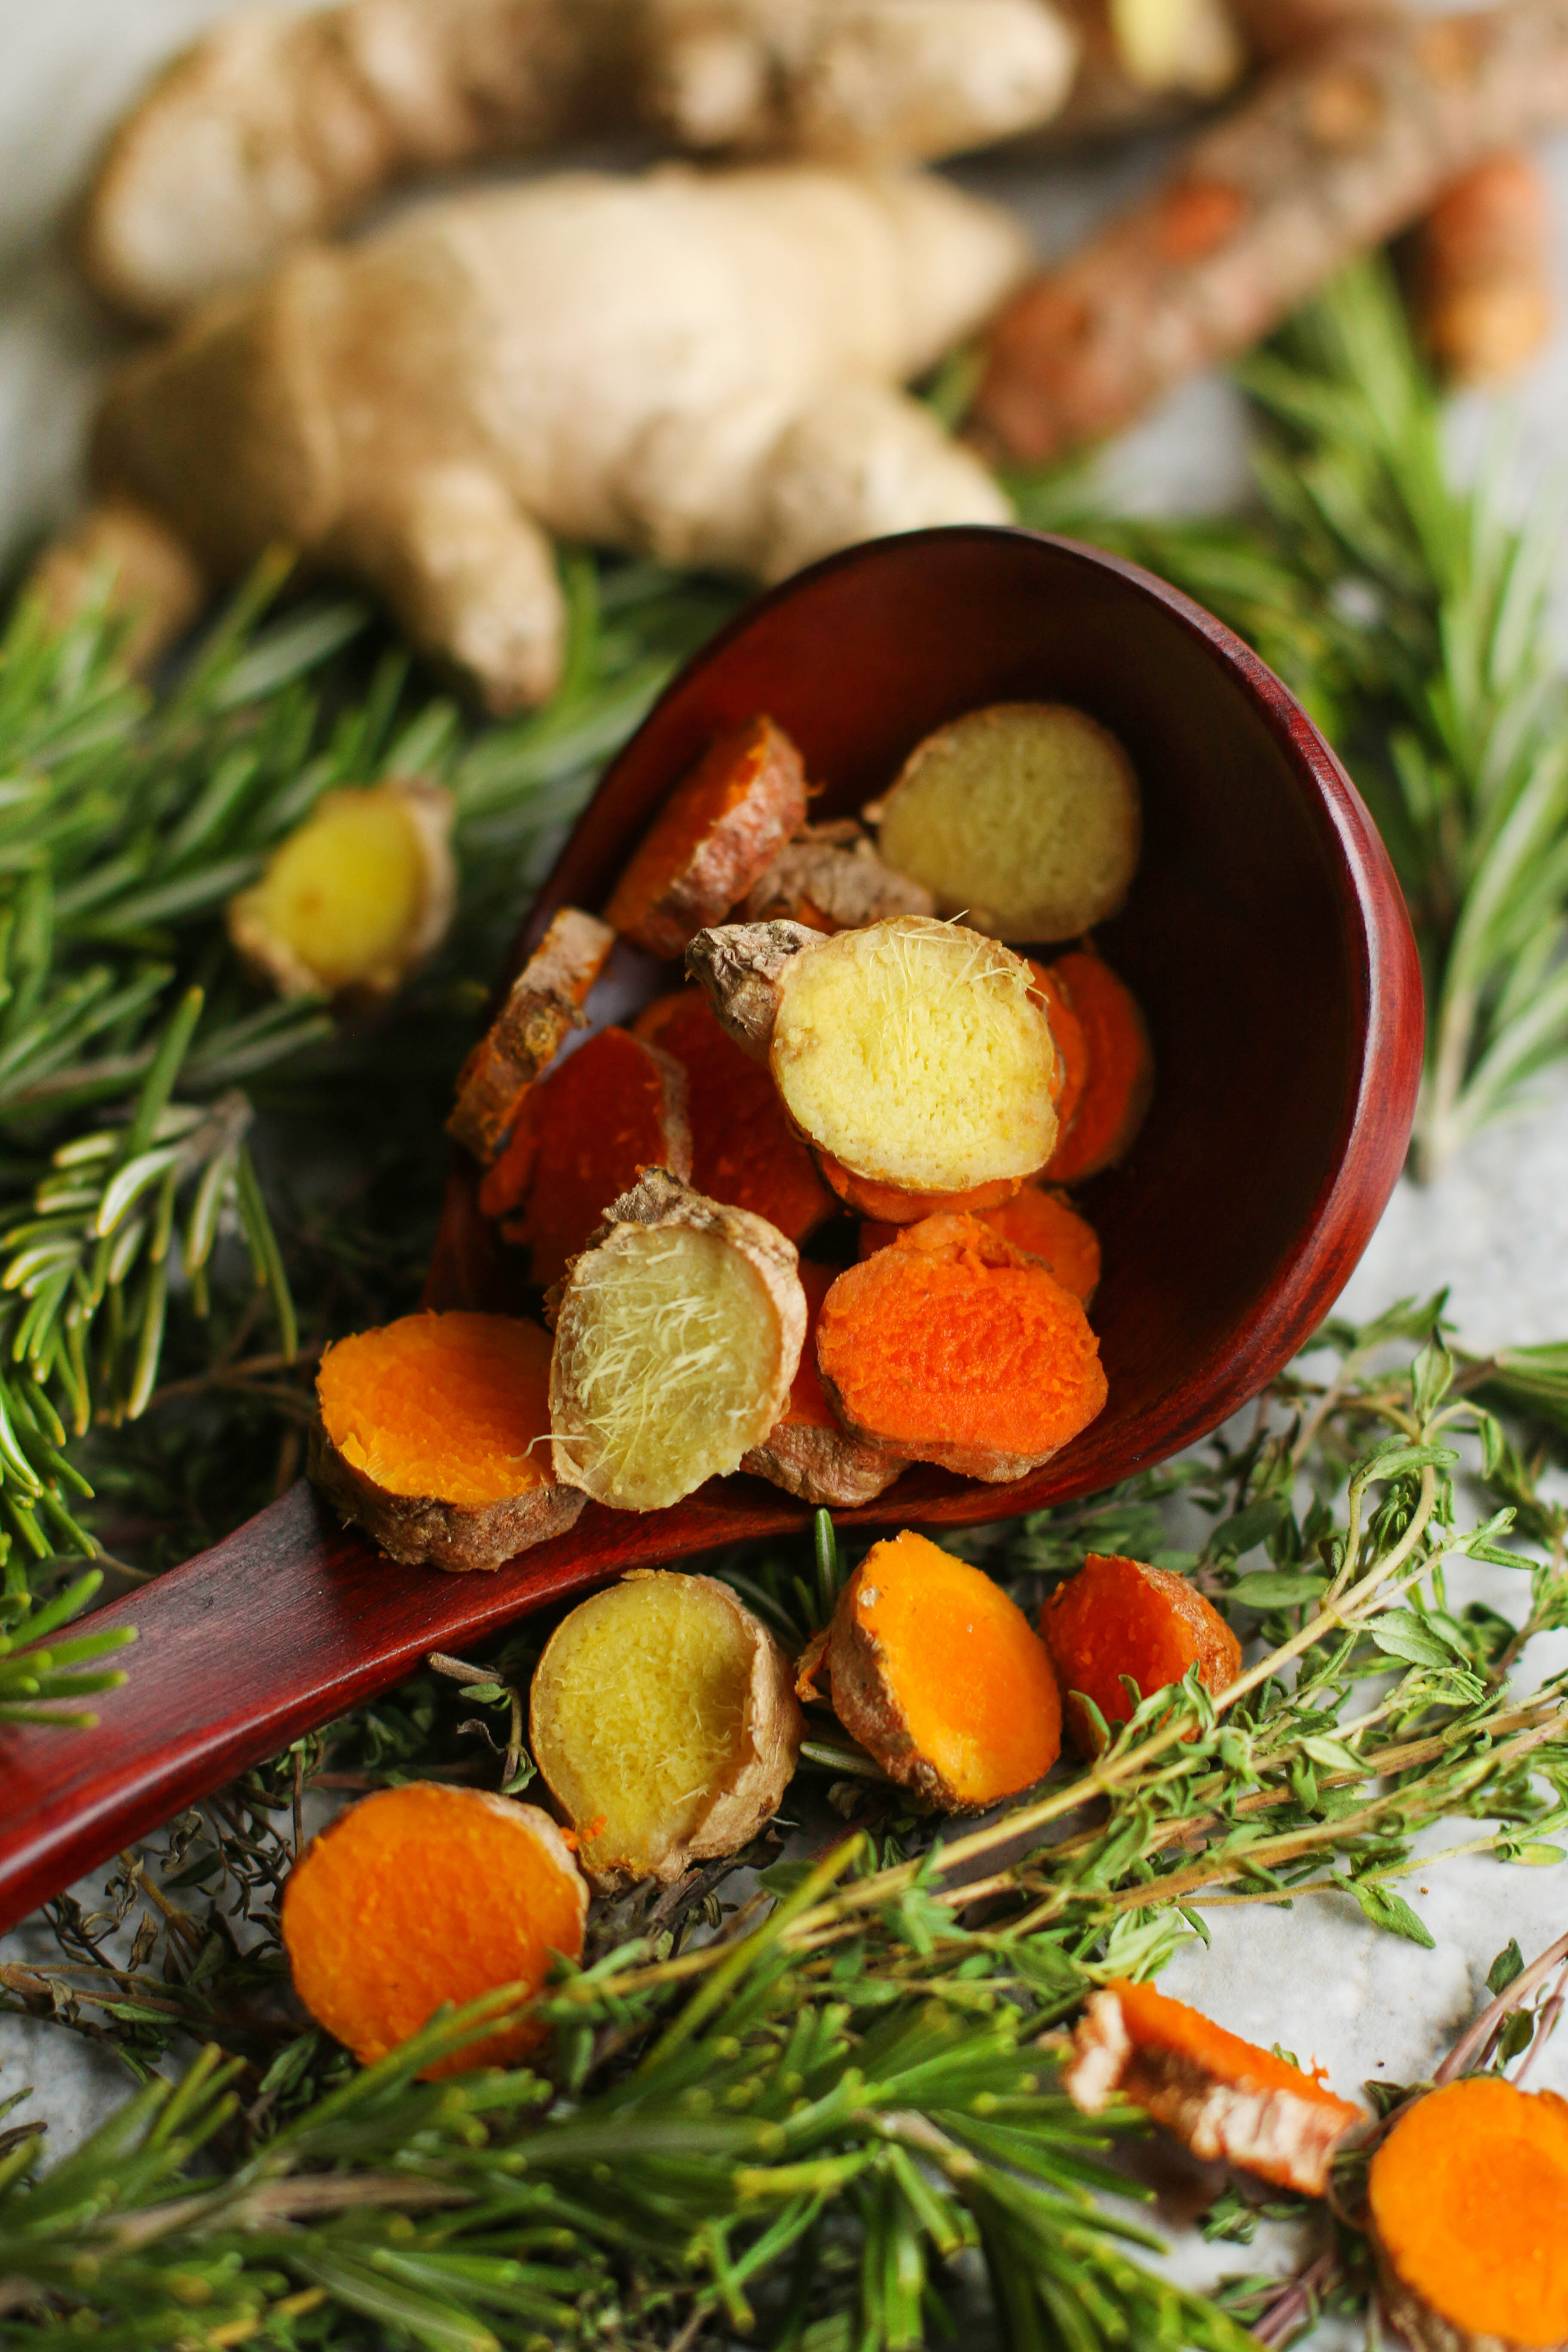 sliced-fresh-turmeric-and-ginger-root-on-wooden-spoon-with-fresh-rosemary-thyme-and-other-herbs